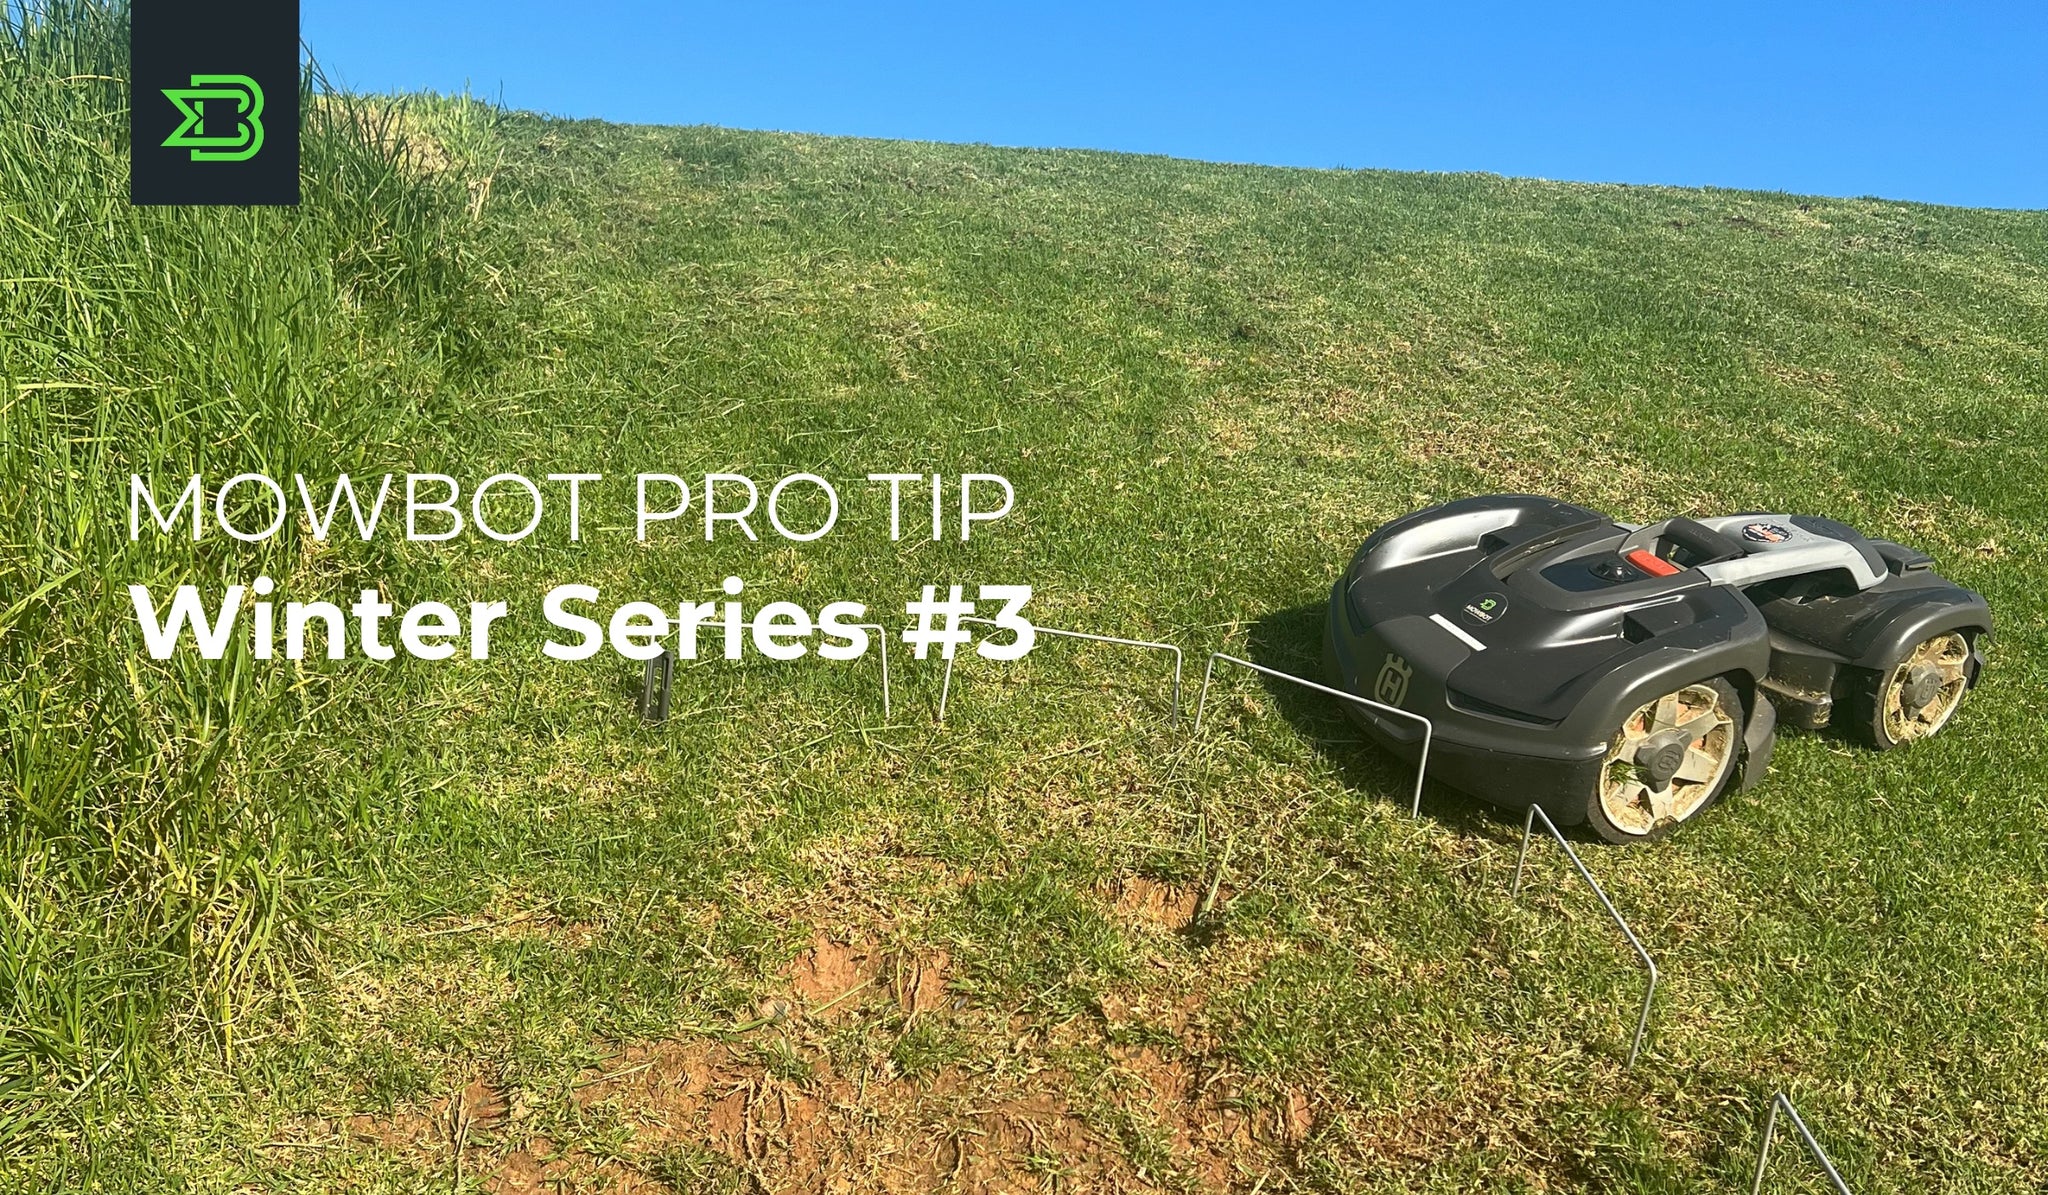 Winter Tip #3 - Keep Your Robotic Lawn Mower Clear of Mud and Water